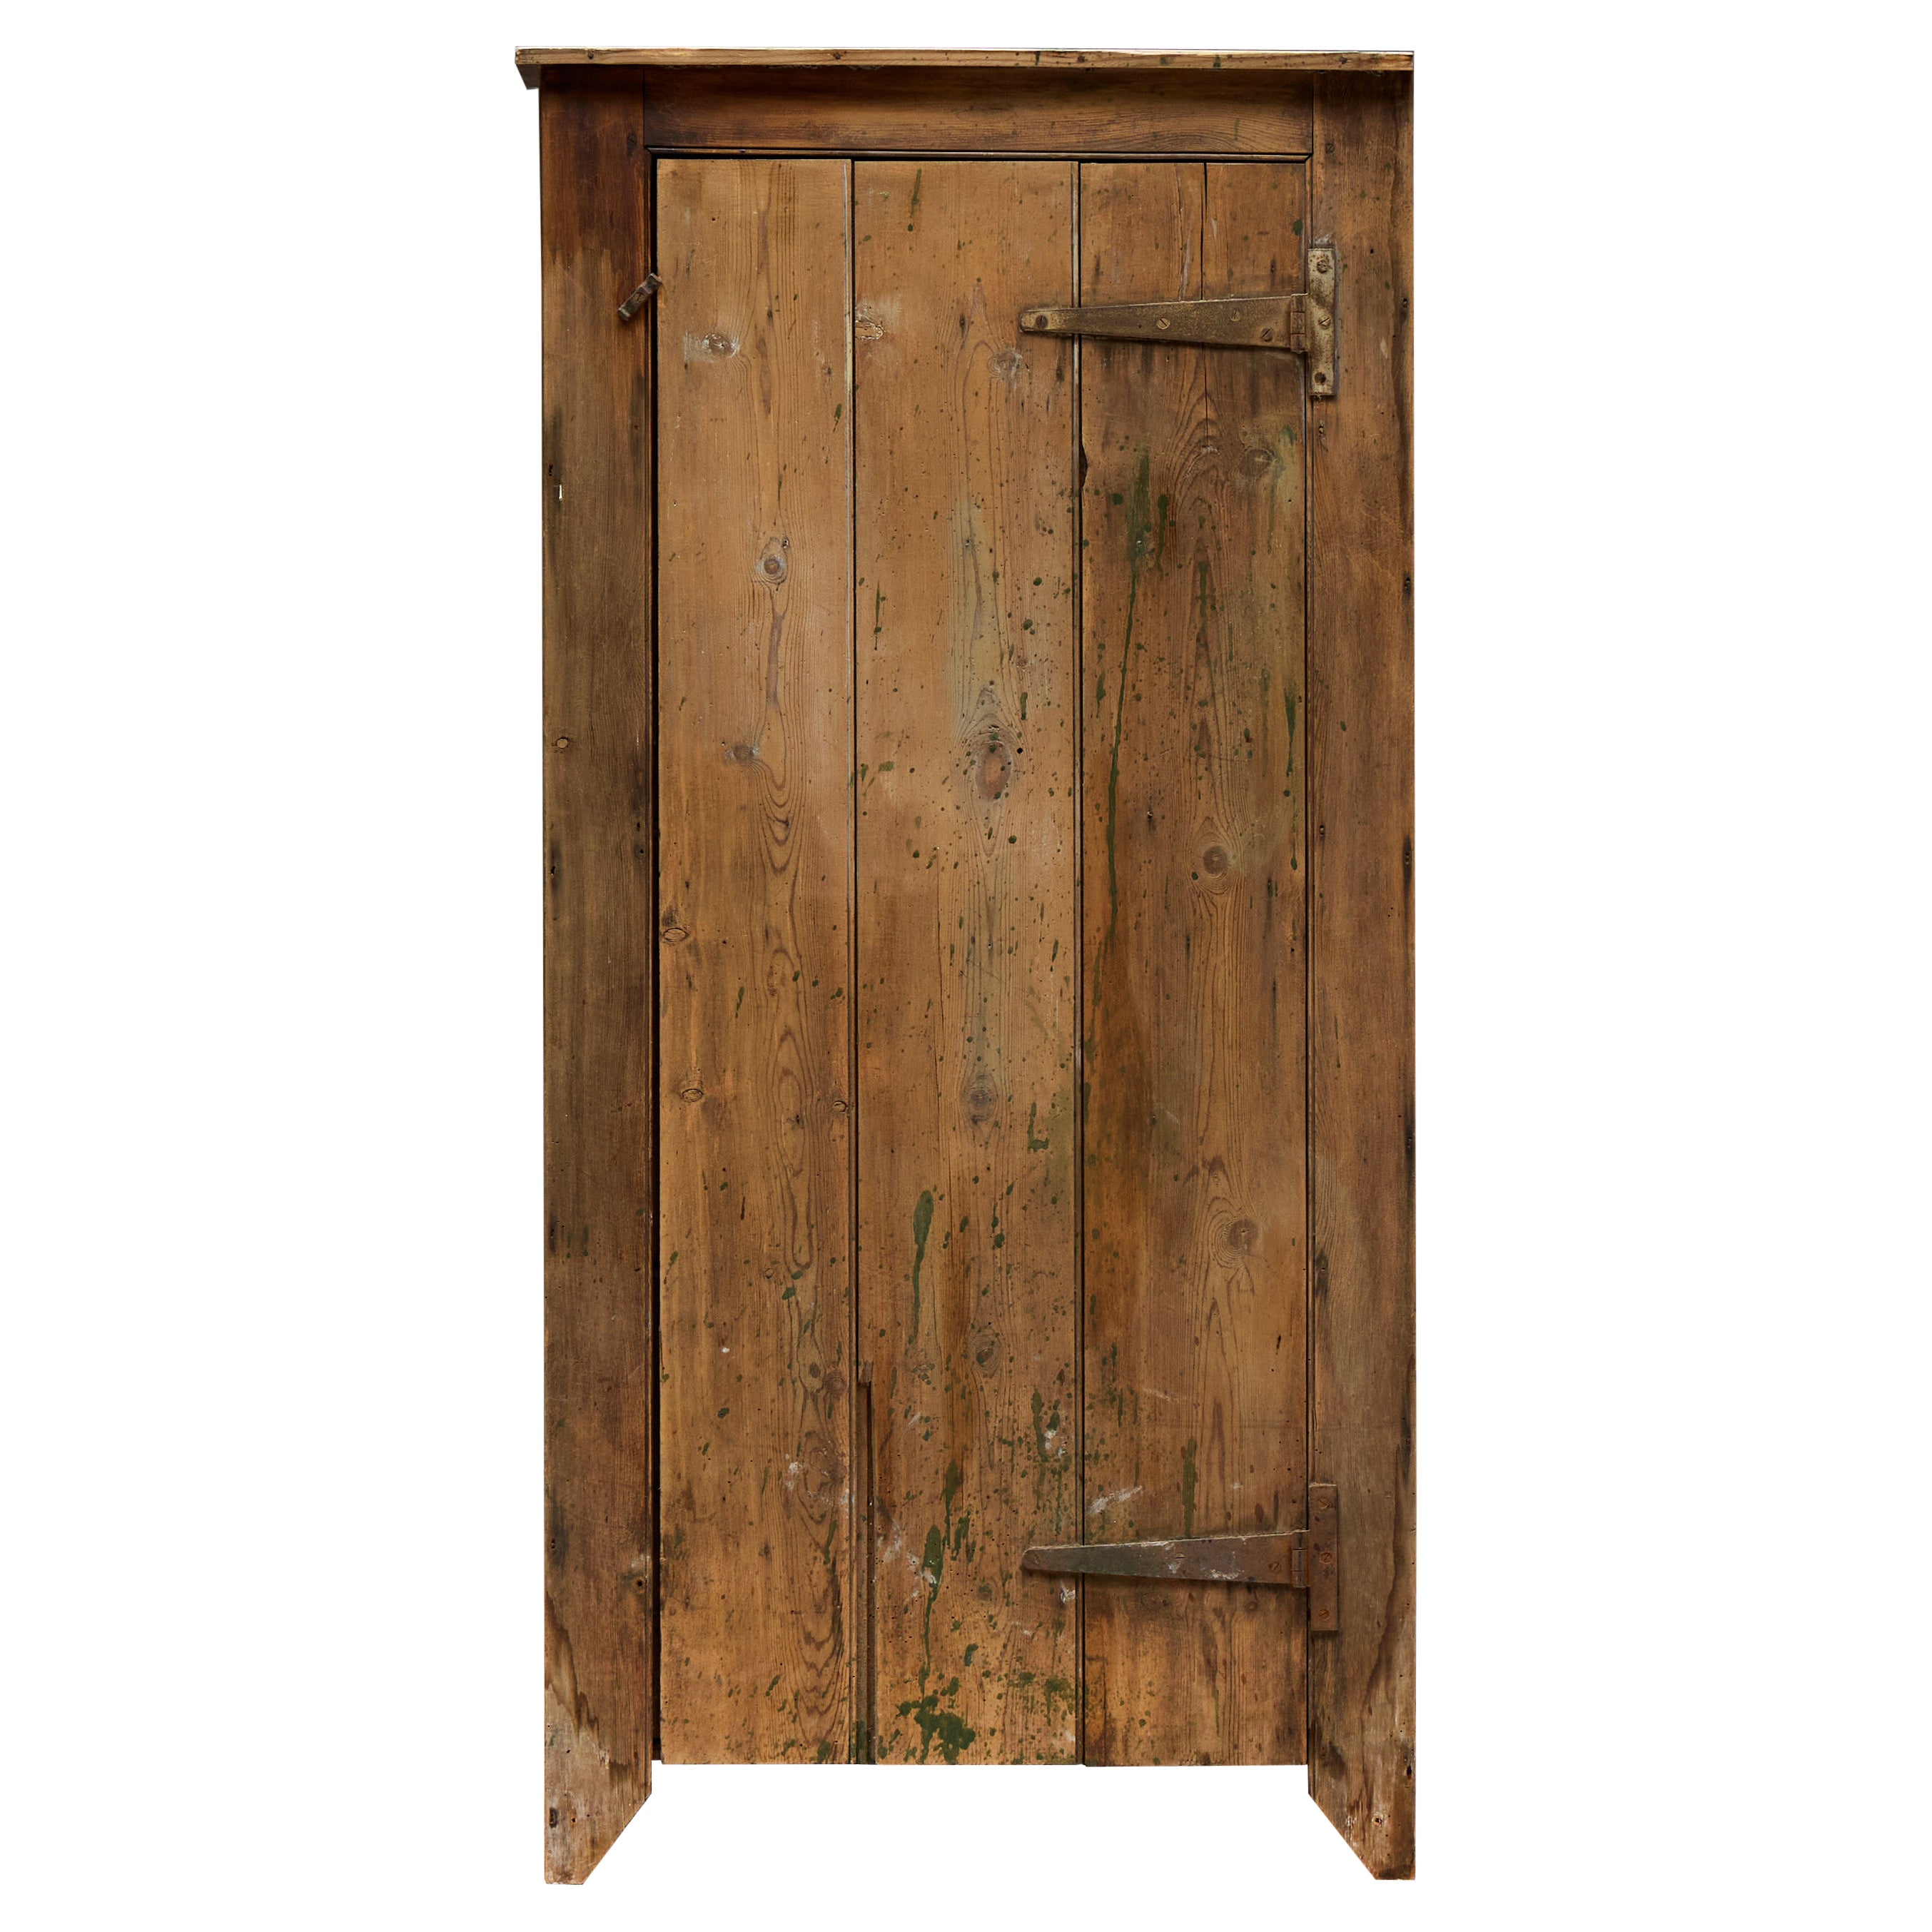 Rustic Travail Populaire Cabinet, France, 19th Century For Sale